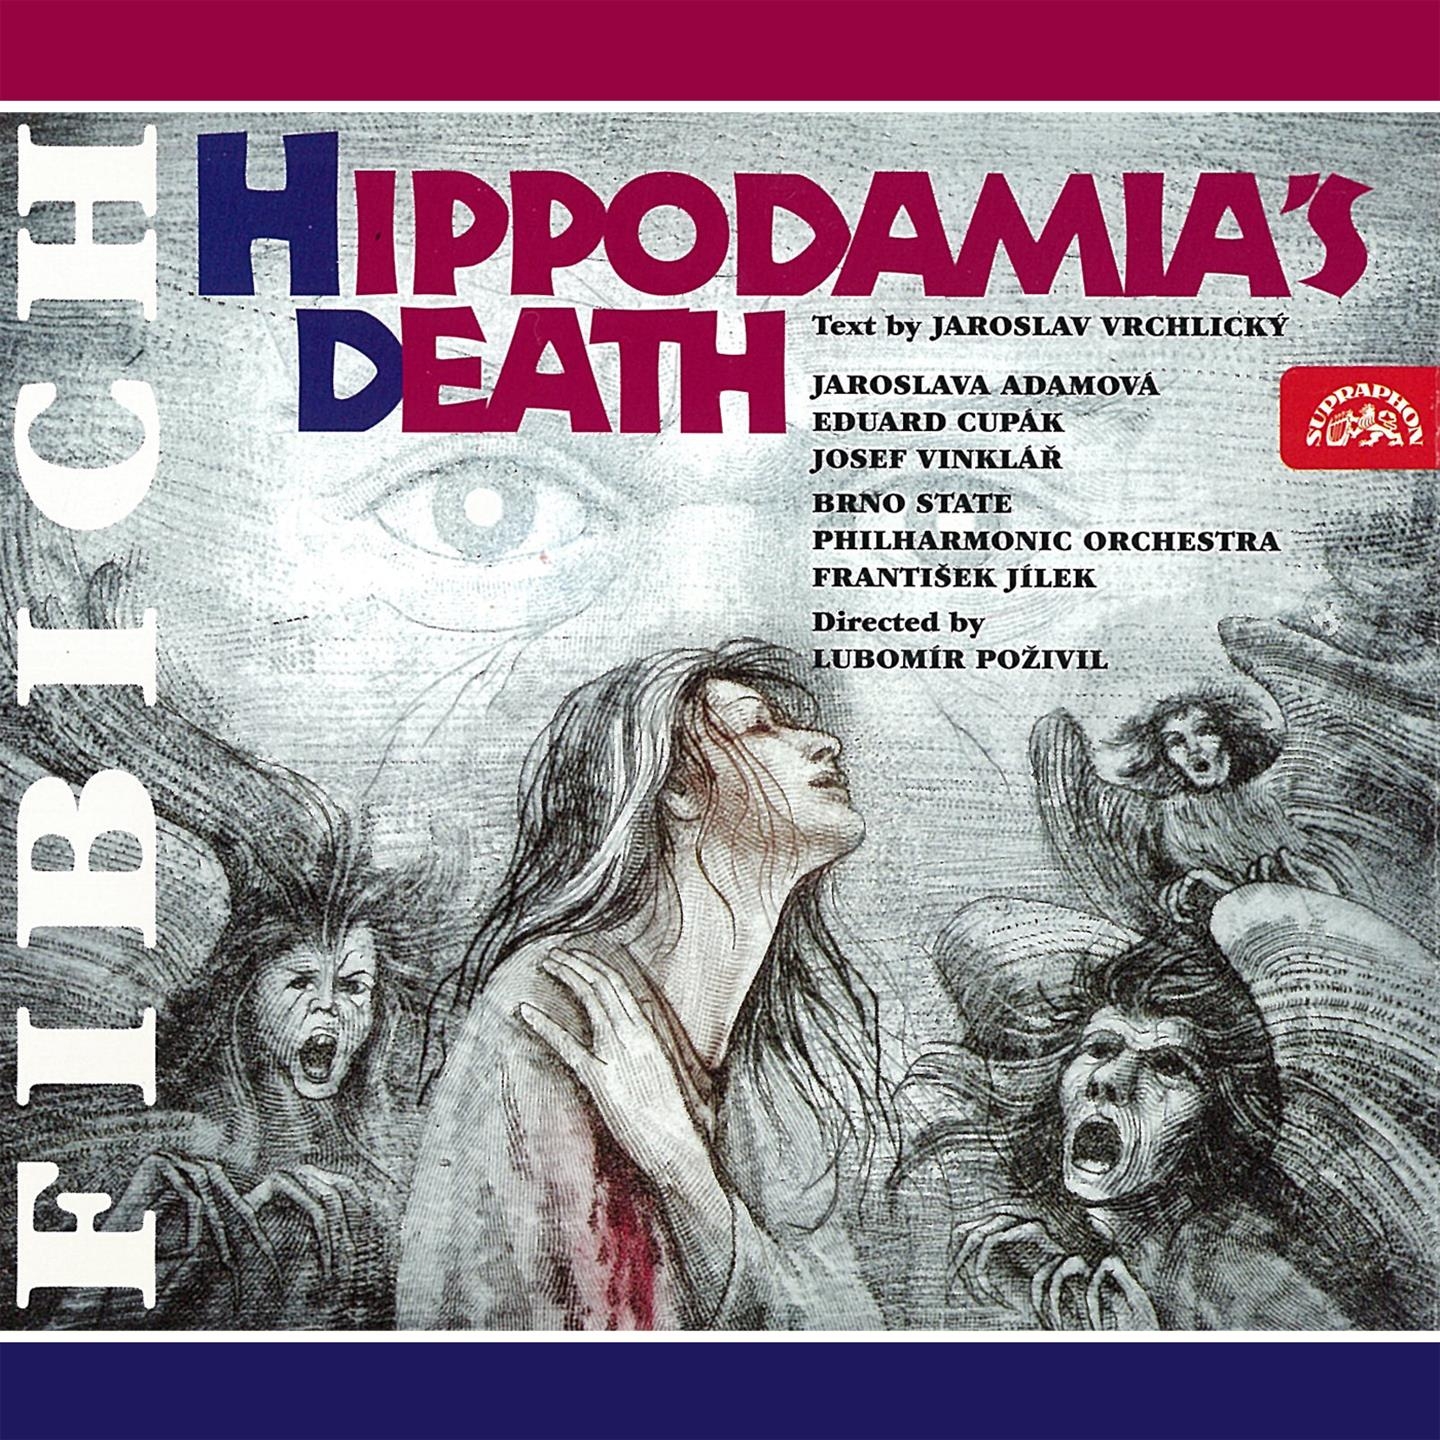 Hippodamia s Death, Op. 33, .: Act 2, Scene 3, 4 and 5: Embracing One Another?